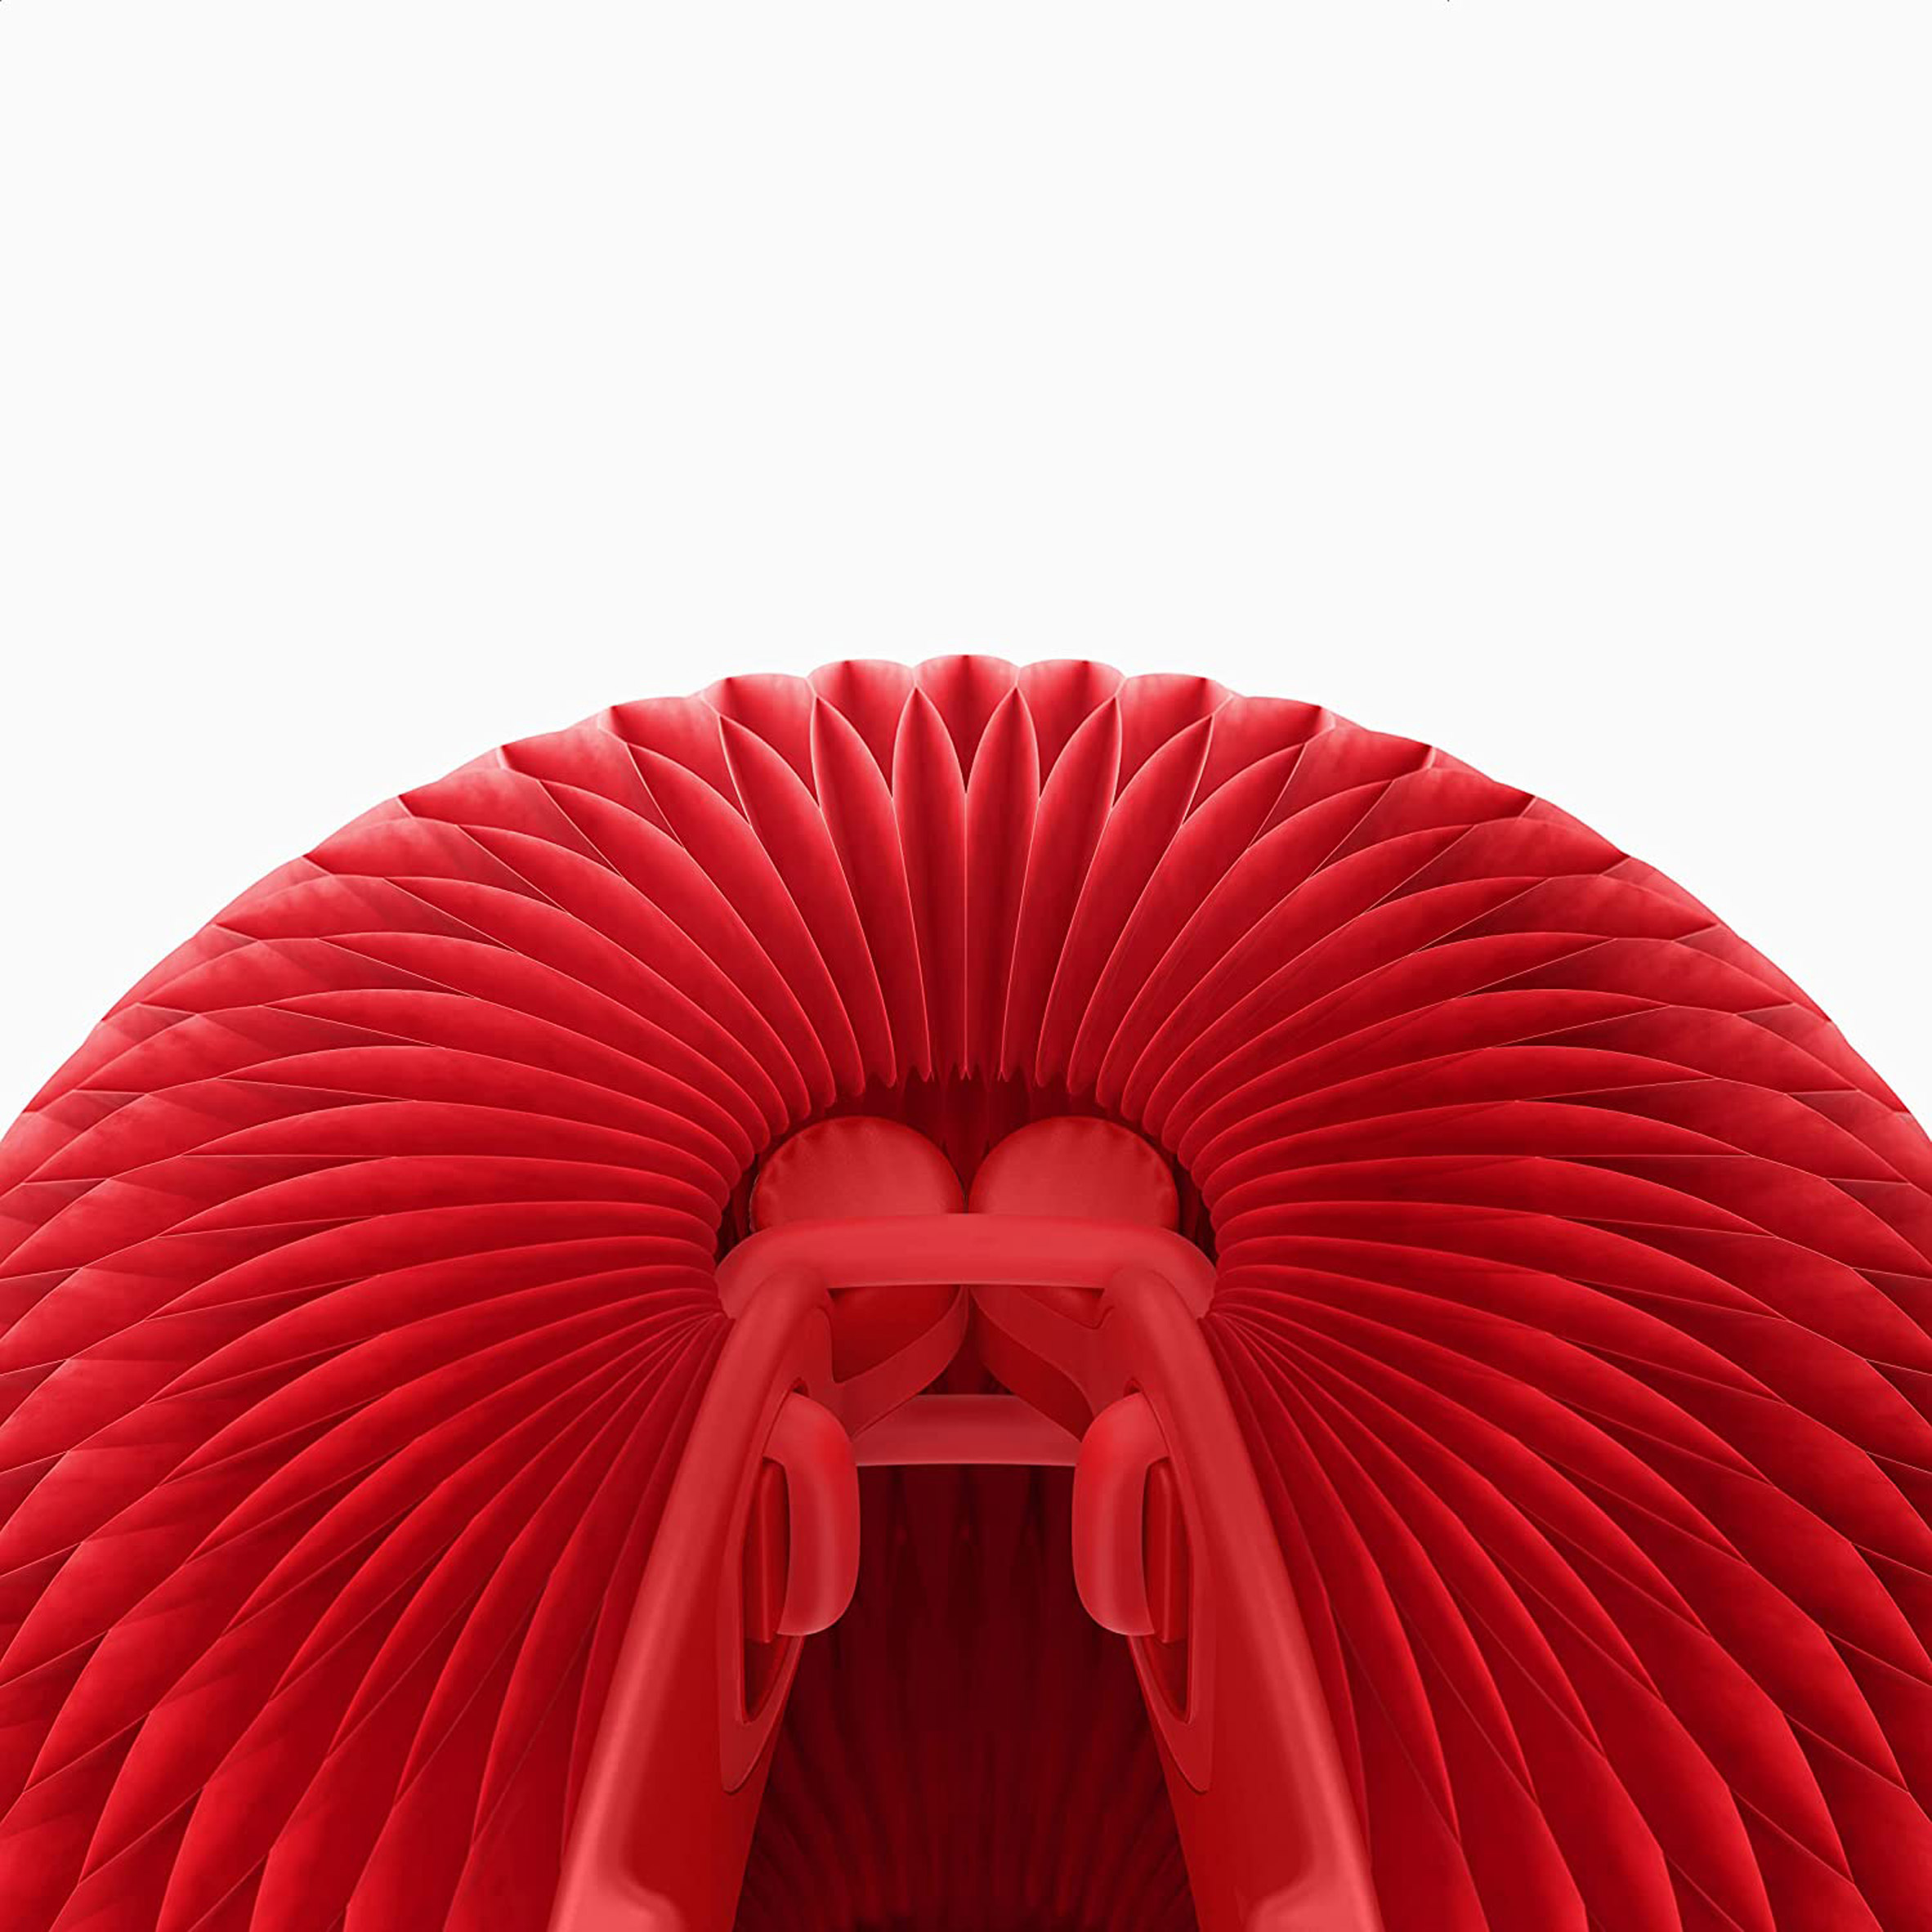 Rendering of a detail of Jony Ive's Red Nose Day nose design, showing the rubber fastening where the ball attached to a nose